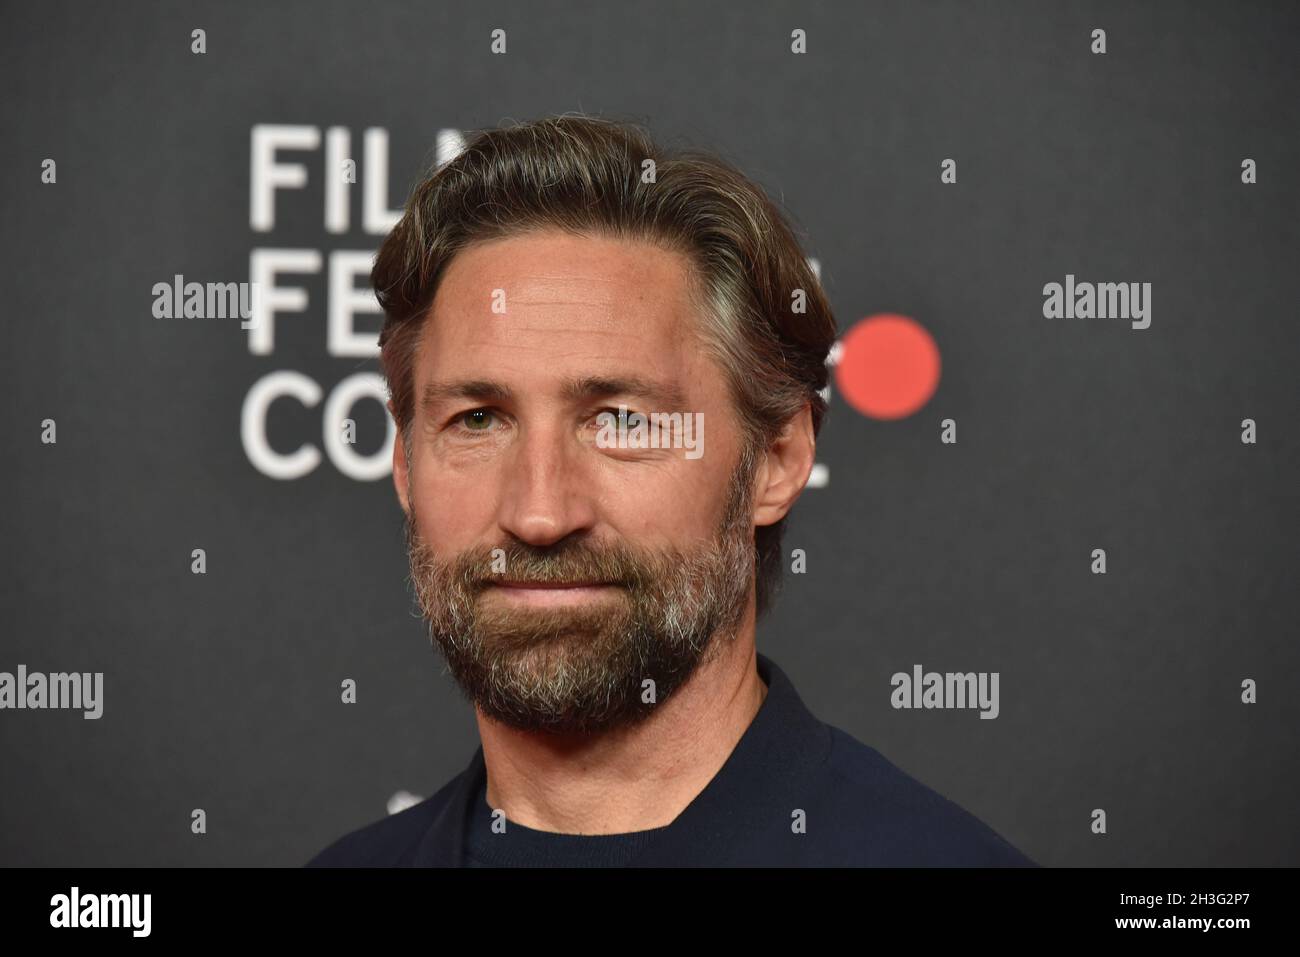 Cologne, Germany. 26th Oct, 2021. Actor Benjamin Sadler arrives for the screening of the film "Das weisse Haus am Rhei" at the Film Festival Cologne. Credit: Horst Galuschka/dpa/Alamy Live News Stock Photo